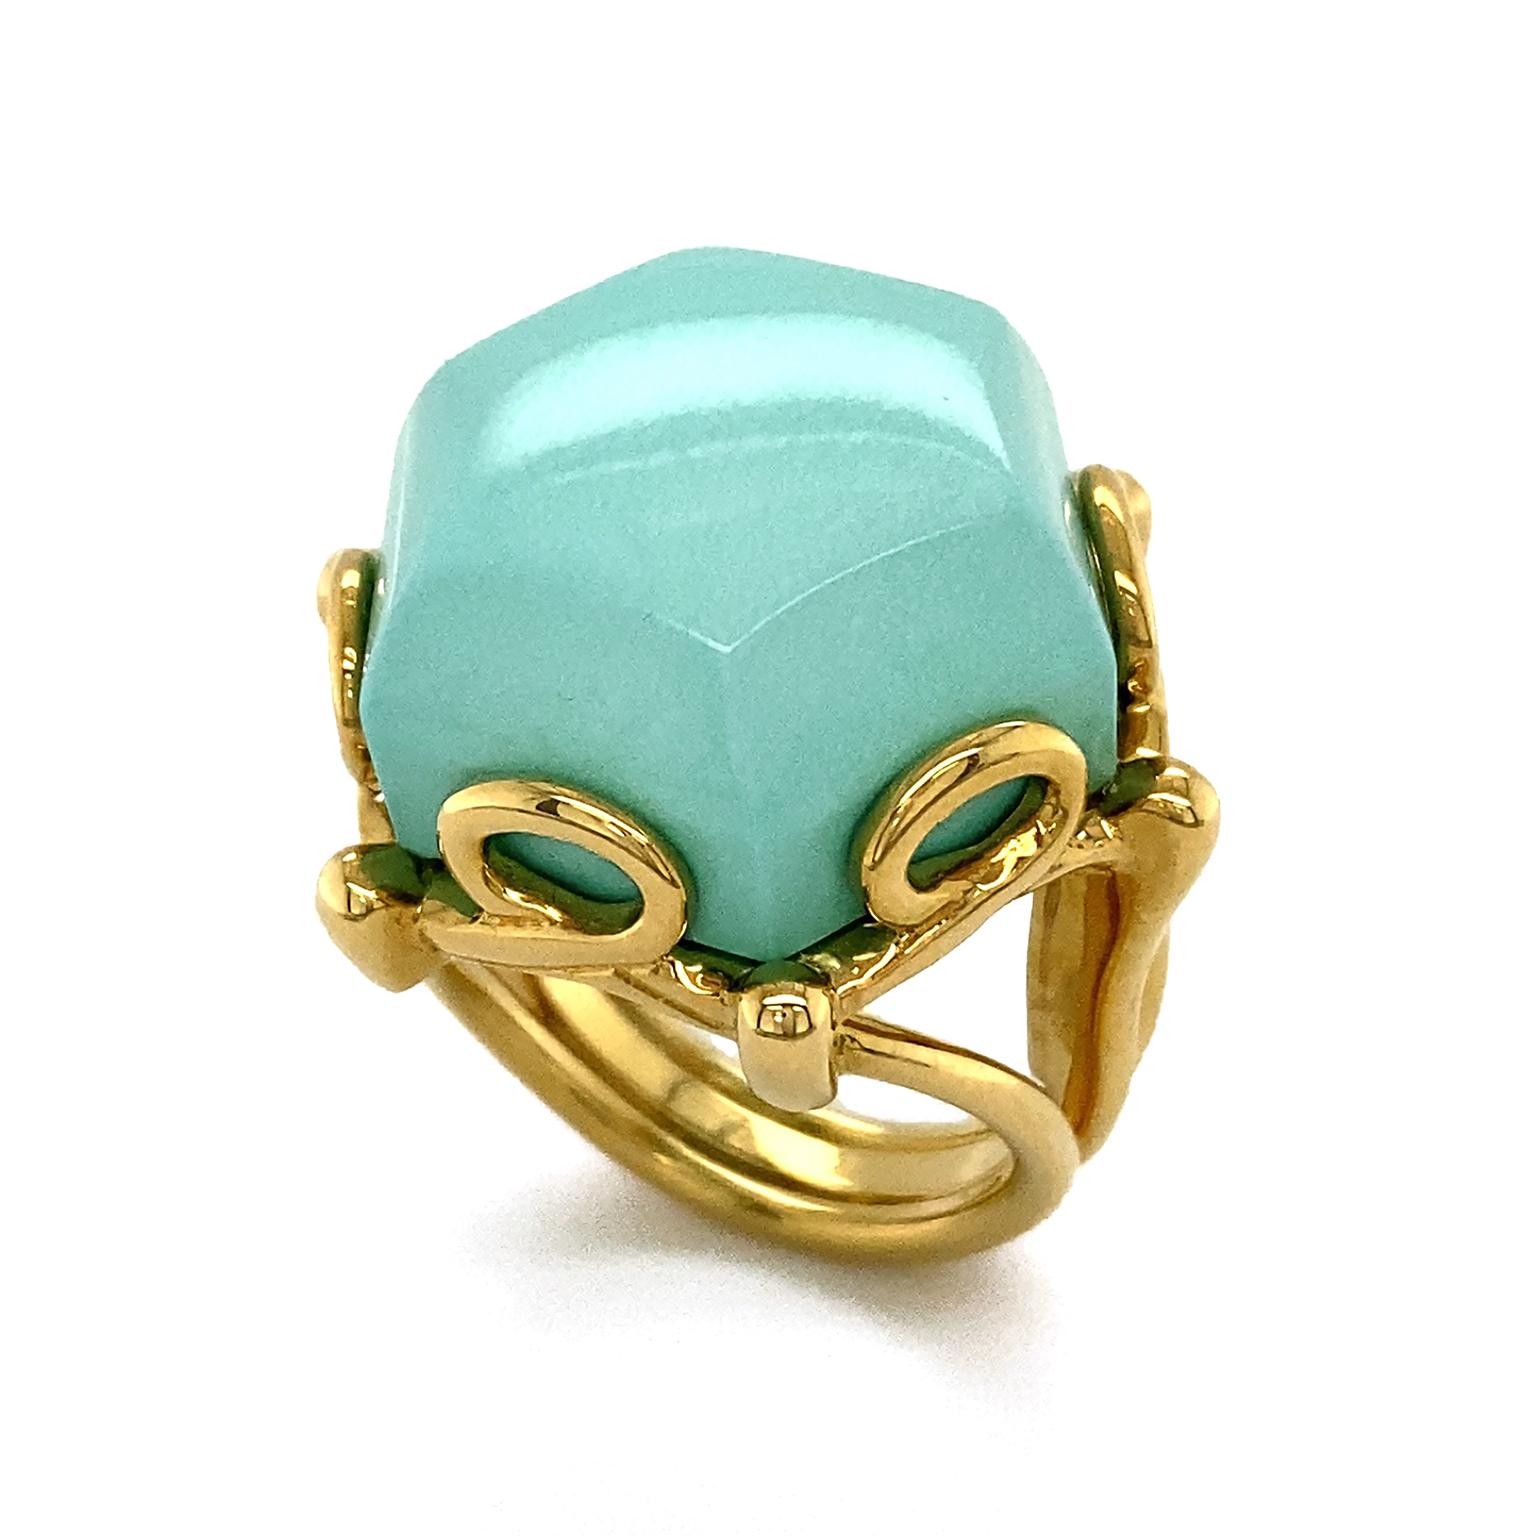 The serene cyan shade of turquoise is showcased in this ring. The gem is cut into a hexagon shaped cut, allowing the light to highlight its singular tone. 18k yellow gold forms the band as well as glides into a pattern of loops for a decorative